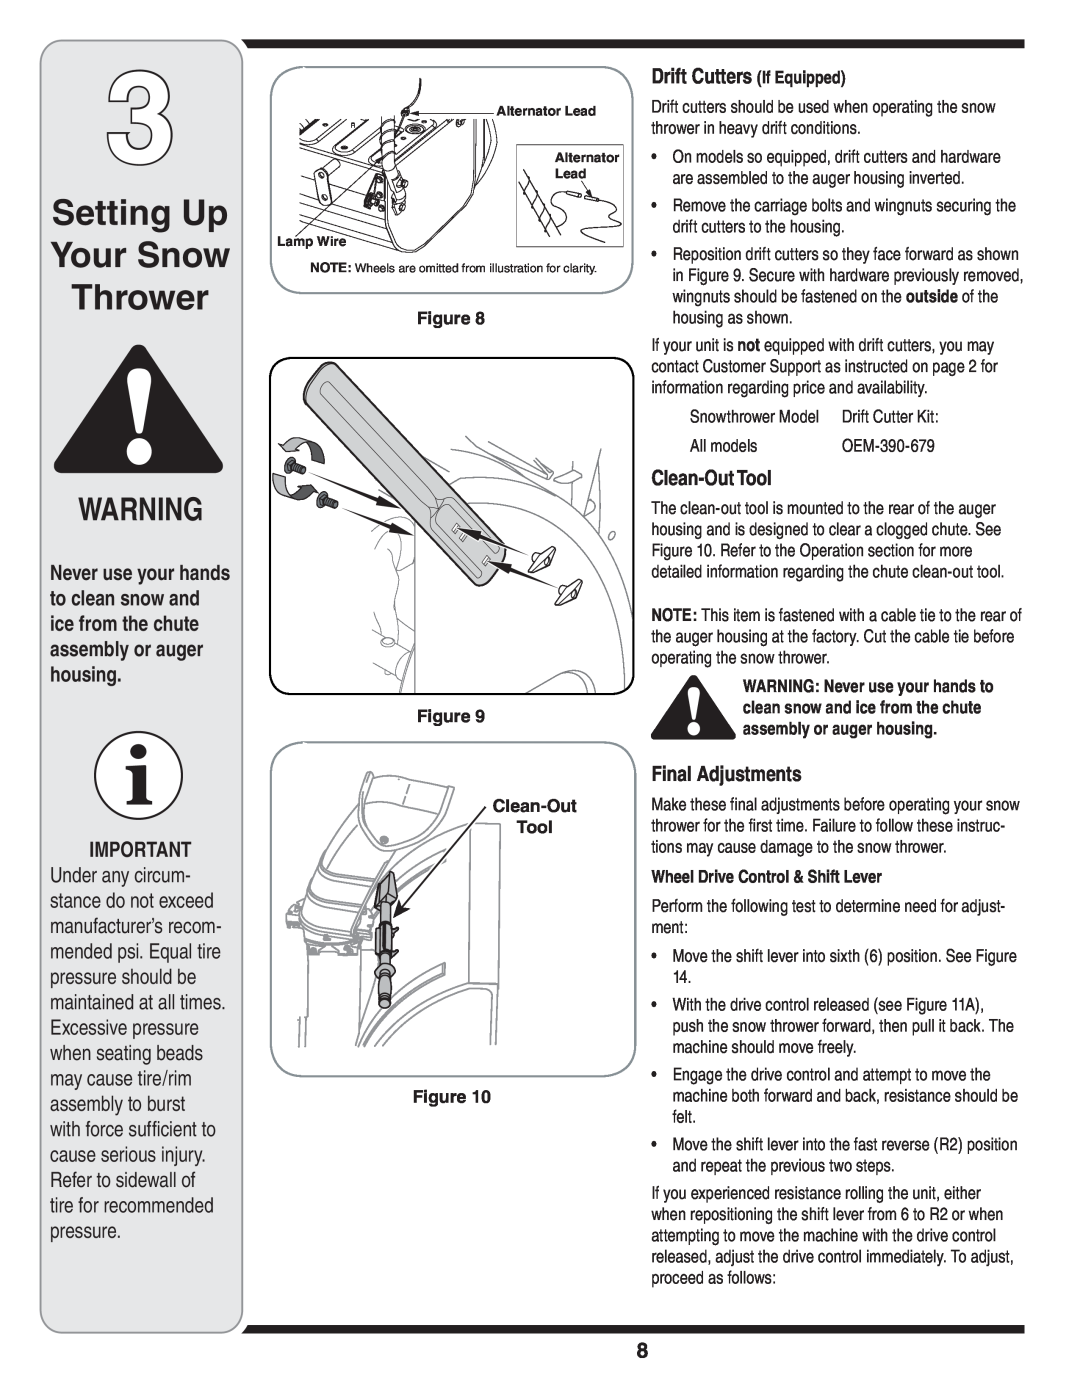 MTD 769-03342 warranty Setting Up Your Snow Thrower, thrower in heavy drift conditions, WARNING Never use your hands to 